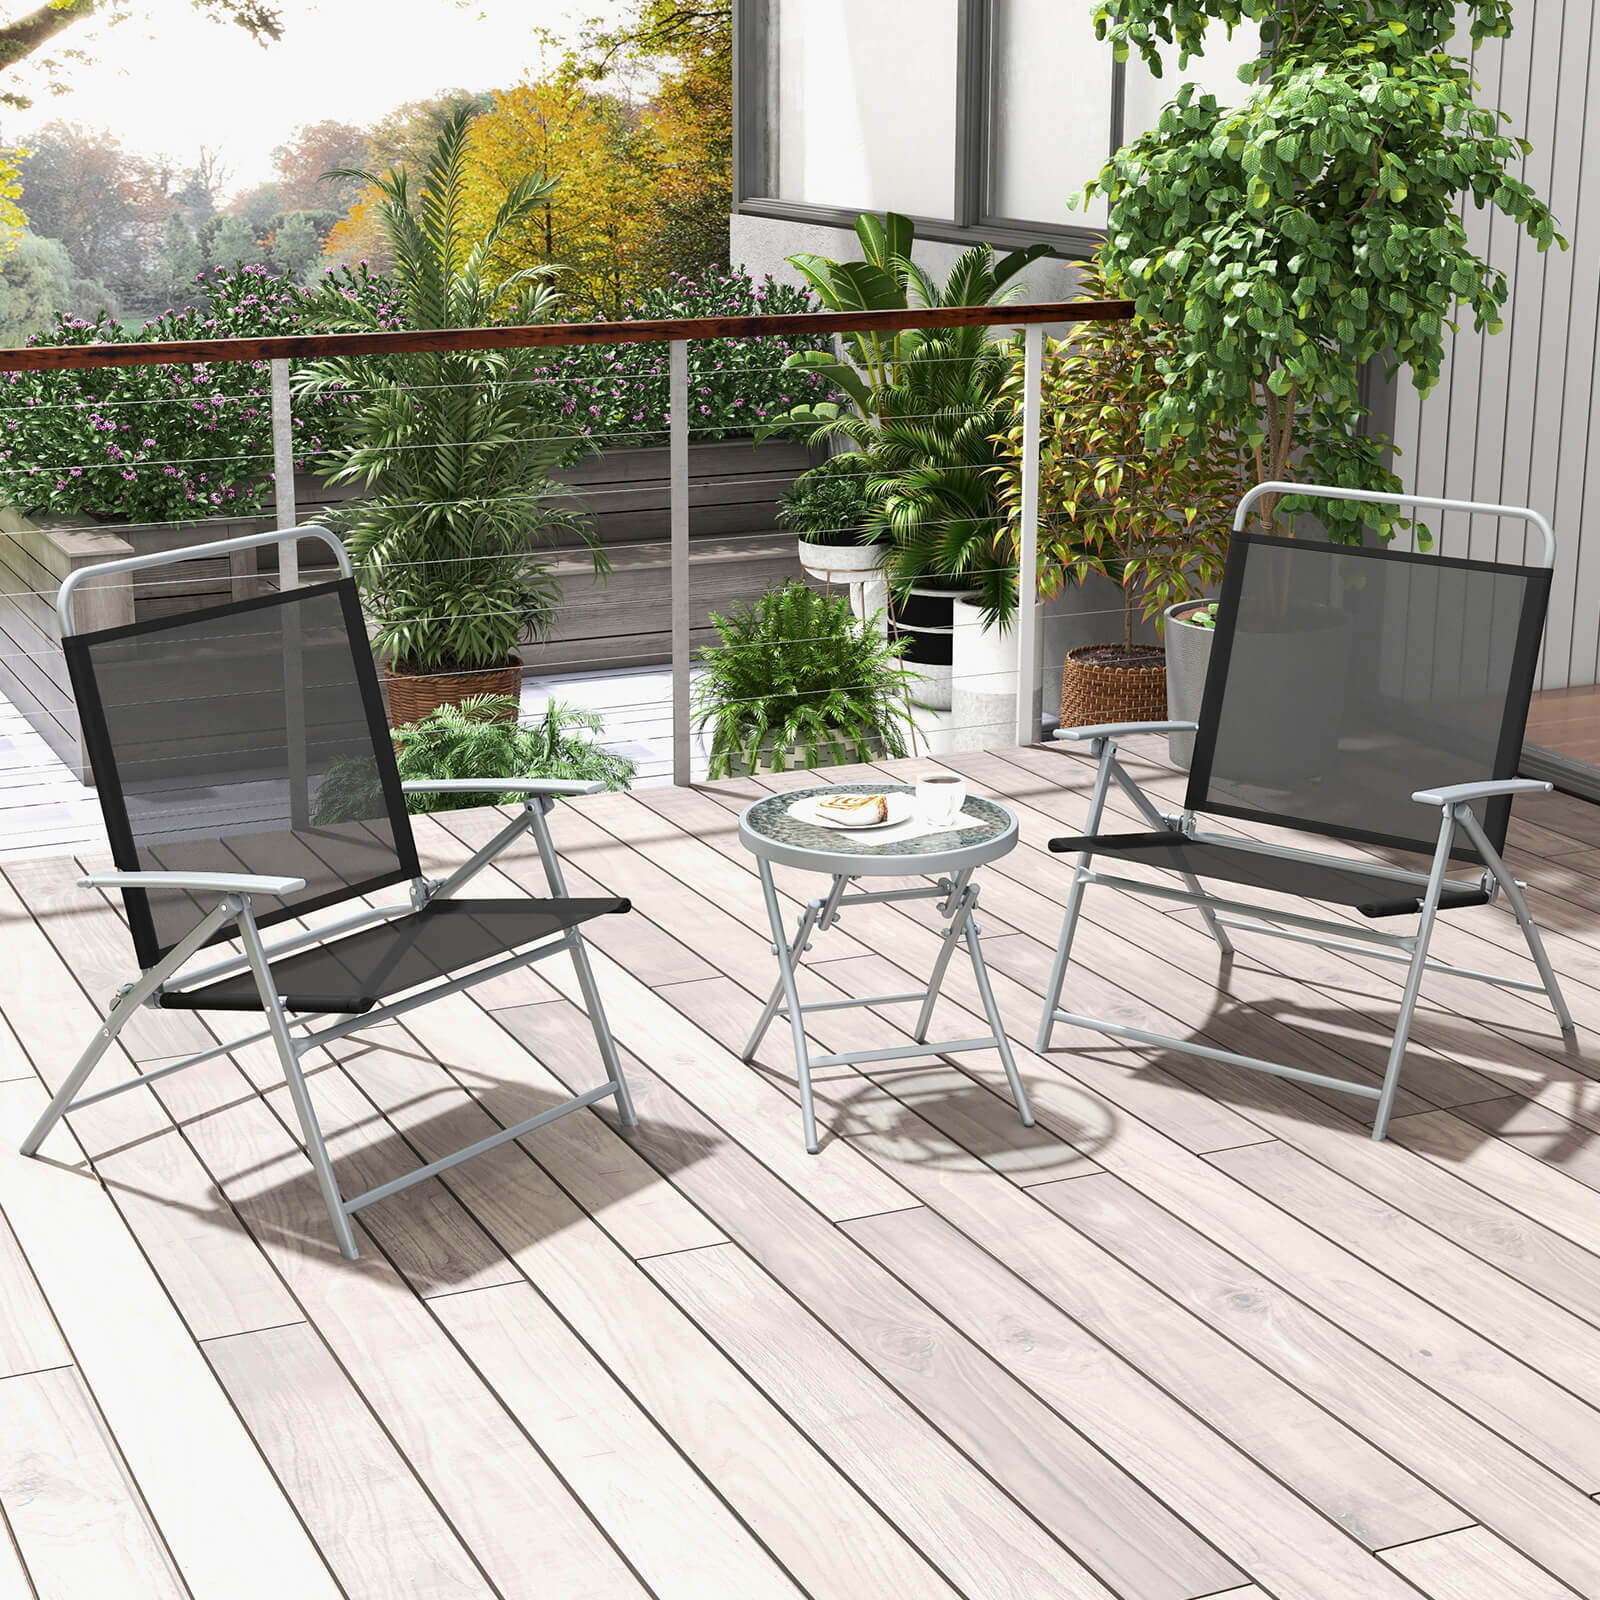 3_Pieces_Patio_Bistro_Set_Foldable_Chairs_and_Table_with_Ripple_like_Glass_Tabletop-6.jpg